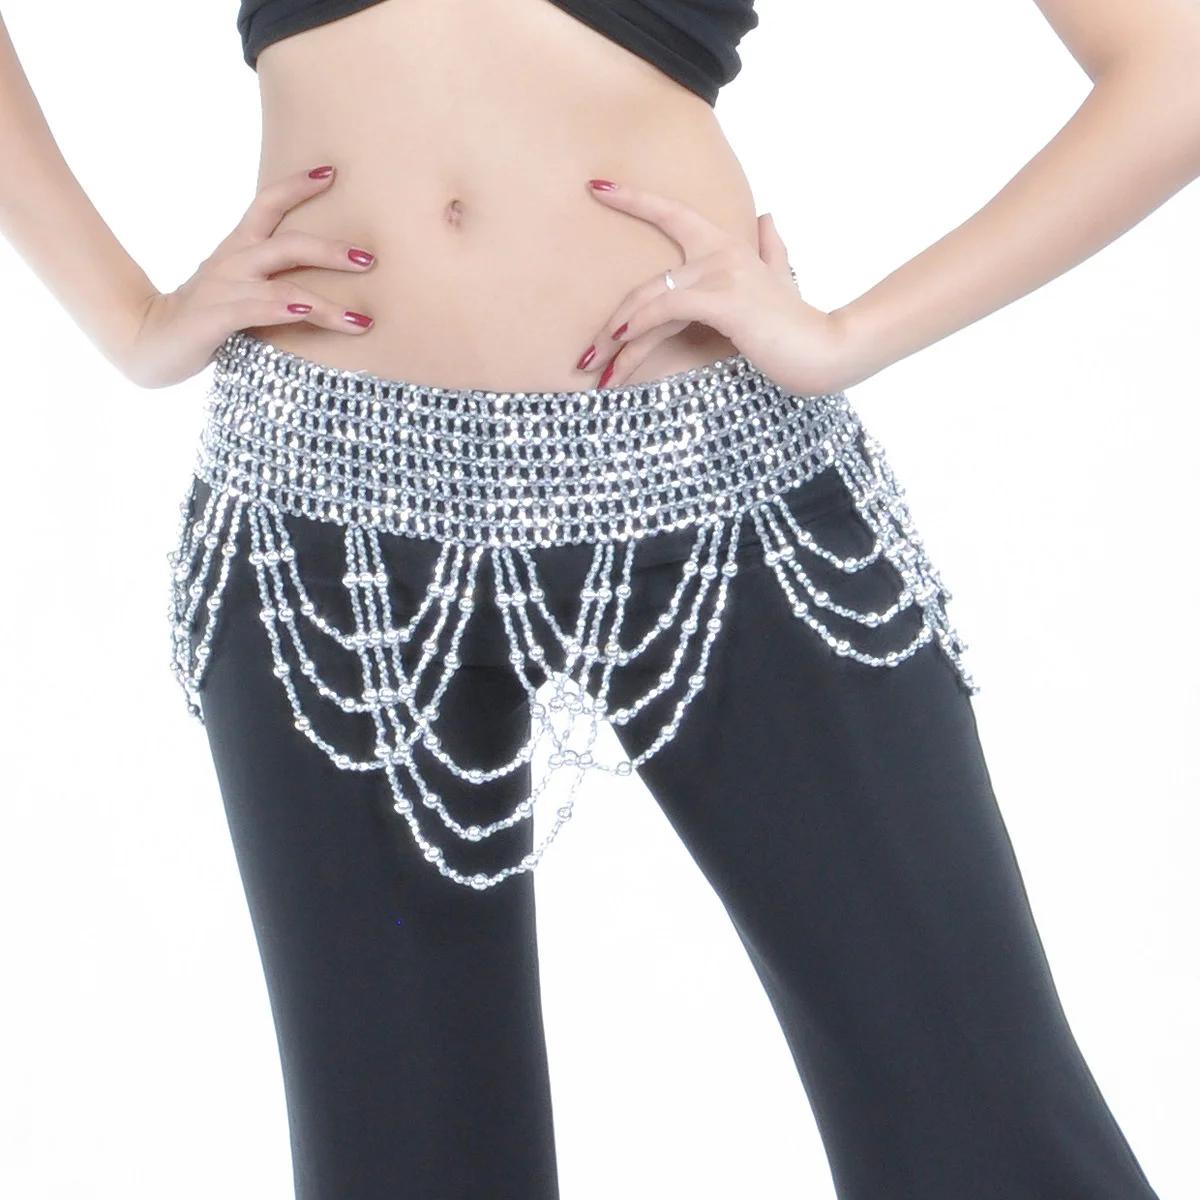 Women Belly Dance Costume Accessories Fringes Hip Scarf Stretchy Thread Wrap SkirtRound Beads Belt